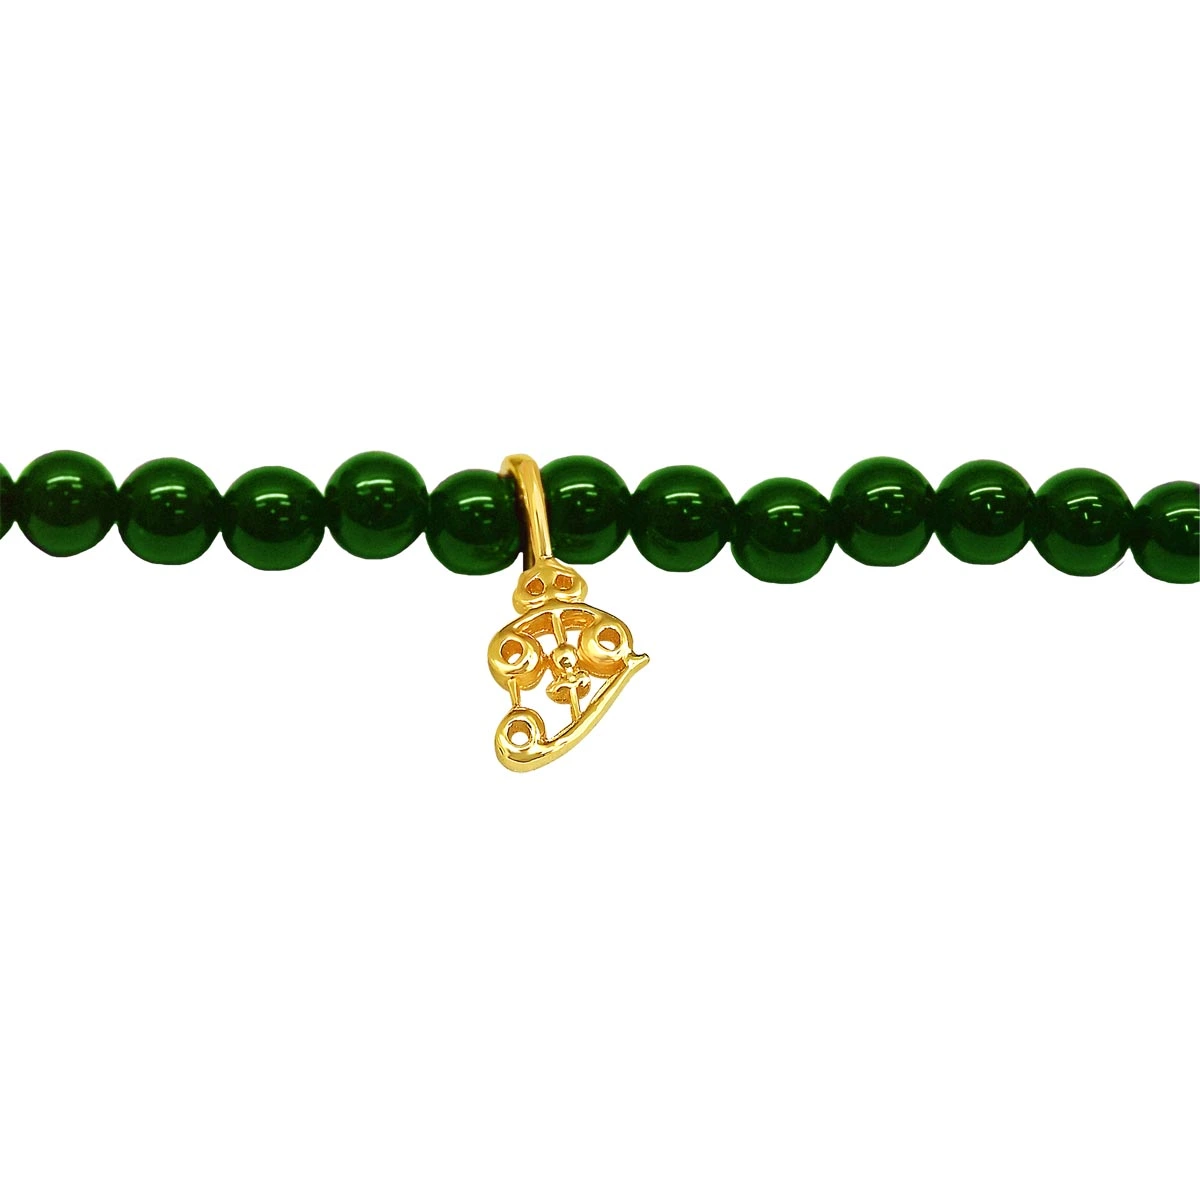 Gold Plated Sterling Silver Shiva's Trishul with Green Onyx Bracelet for Men and Women (SB73)